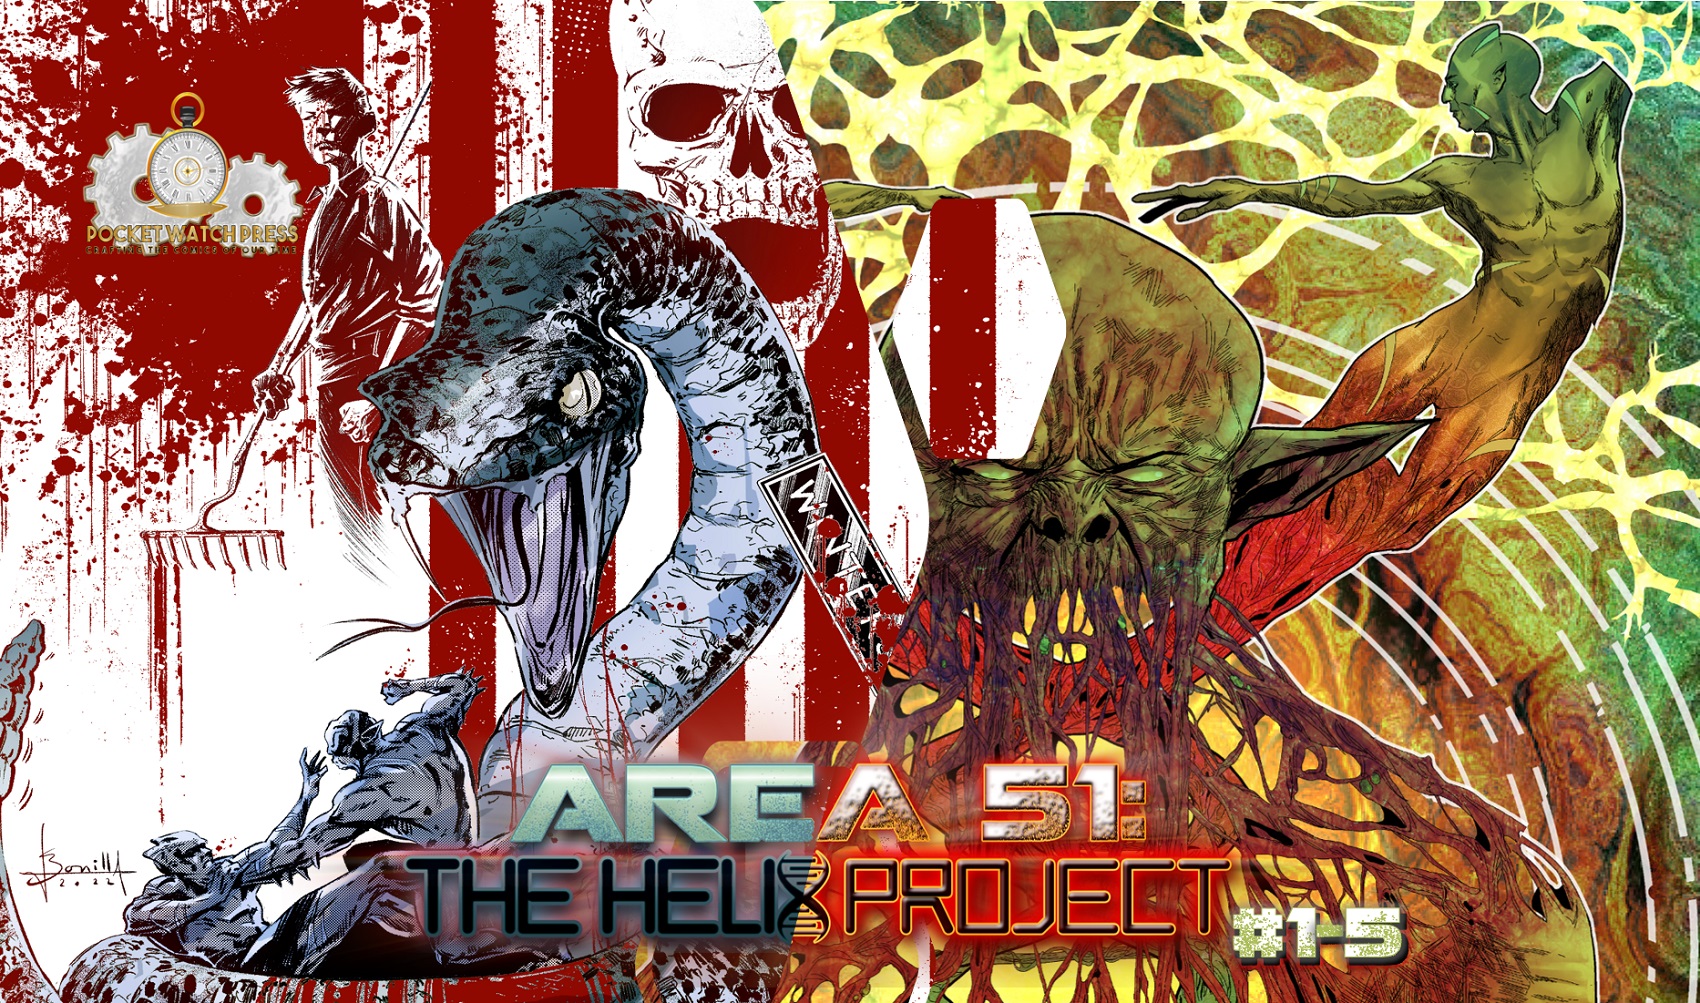 Area 51: The Helix Project #5 Kick-Off: The Comic Source Podcast